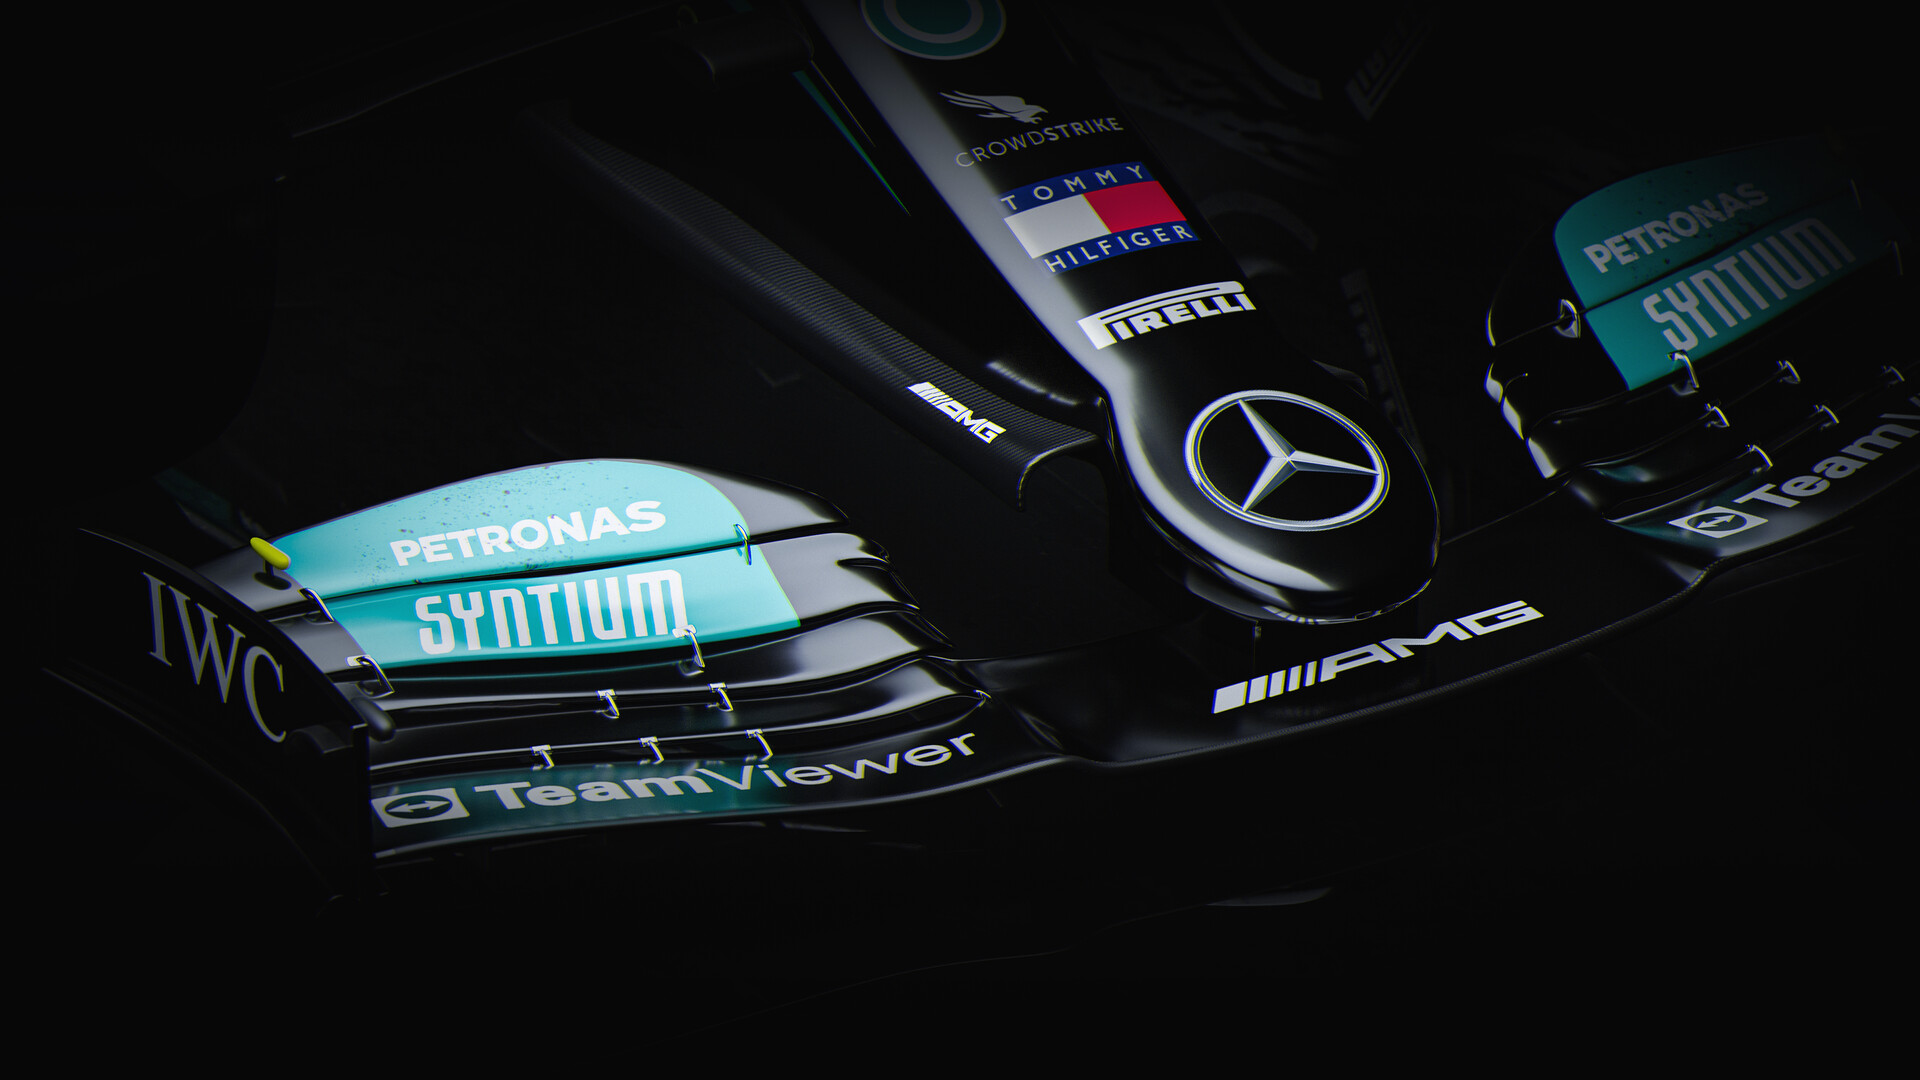 Mercedes-Amg W12 E Performance Wallpapers